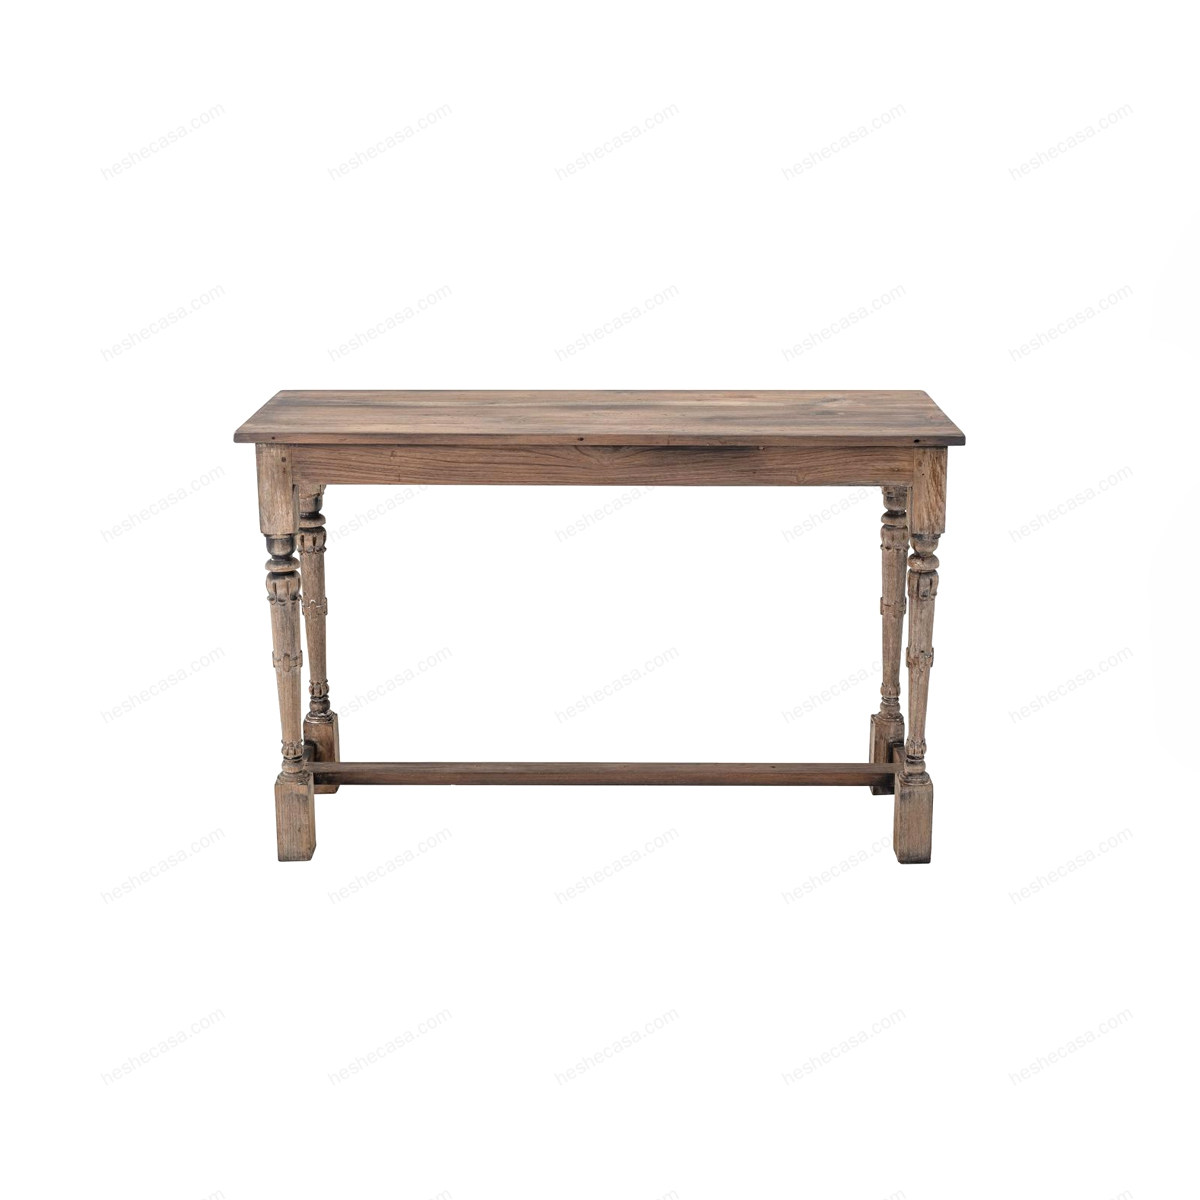 Penti Console Table, Nature, Recycled Wood玄关